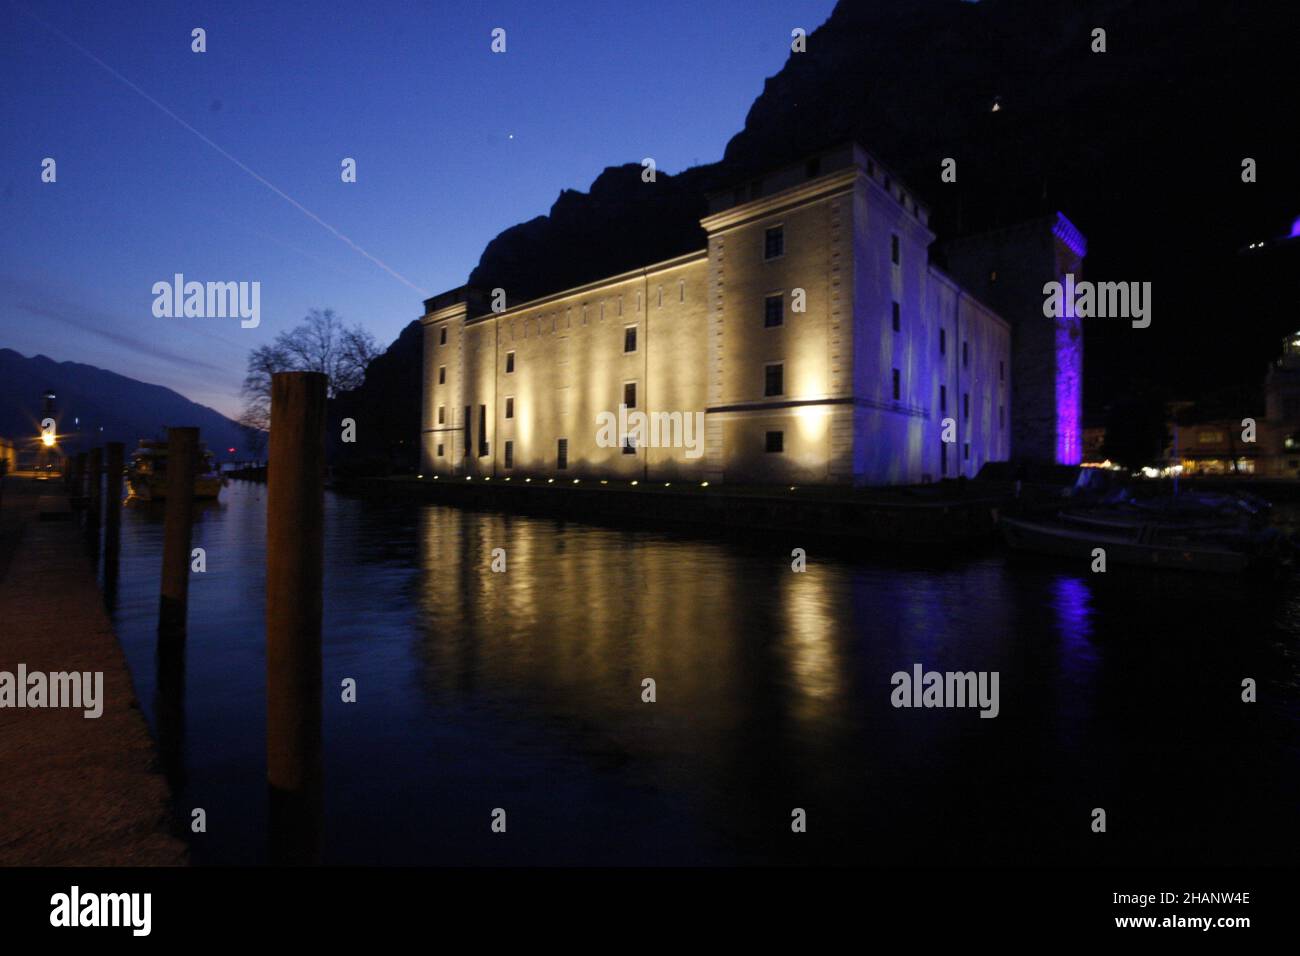 Beautiful images photographed at sunset in the medieval town of Riva del Garda, in Trentino Alto Adice, Italy, on Lake Garda at night during the Chris Stock Photo